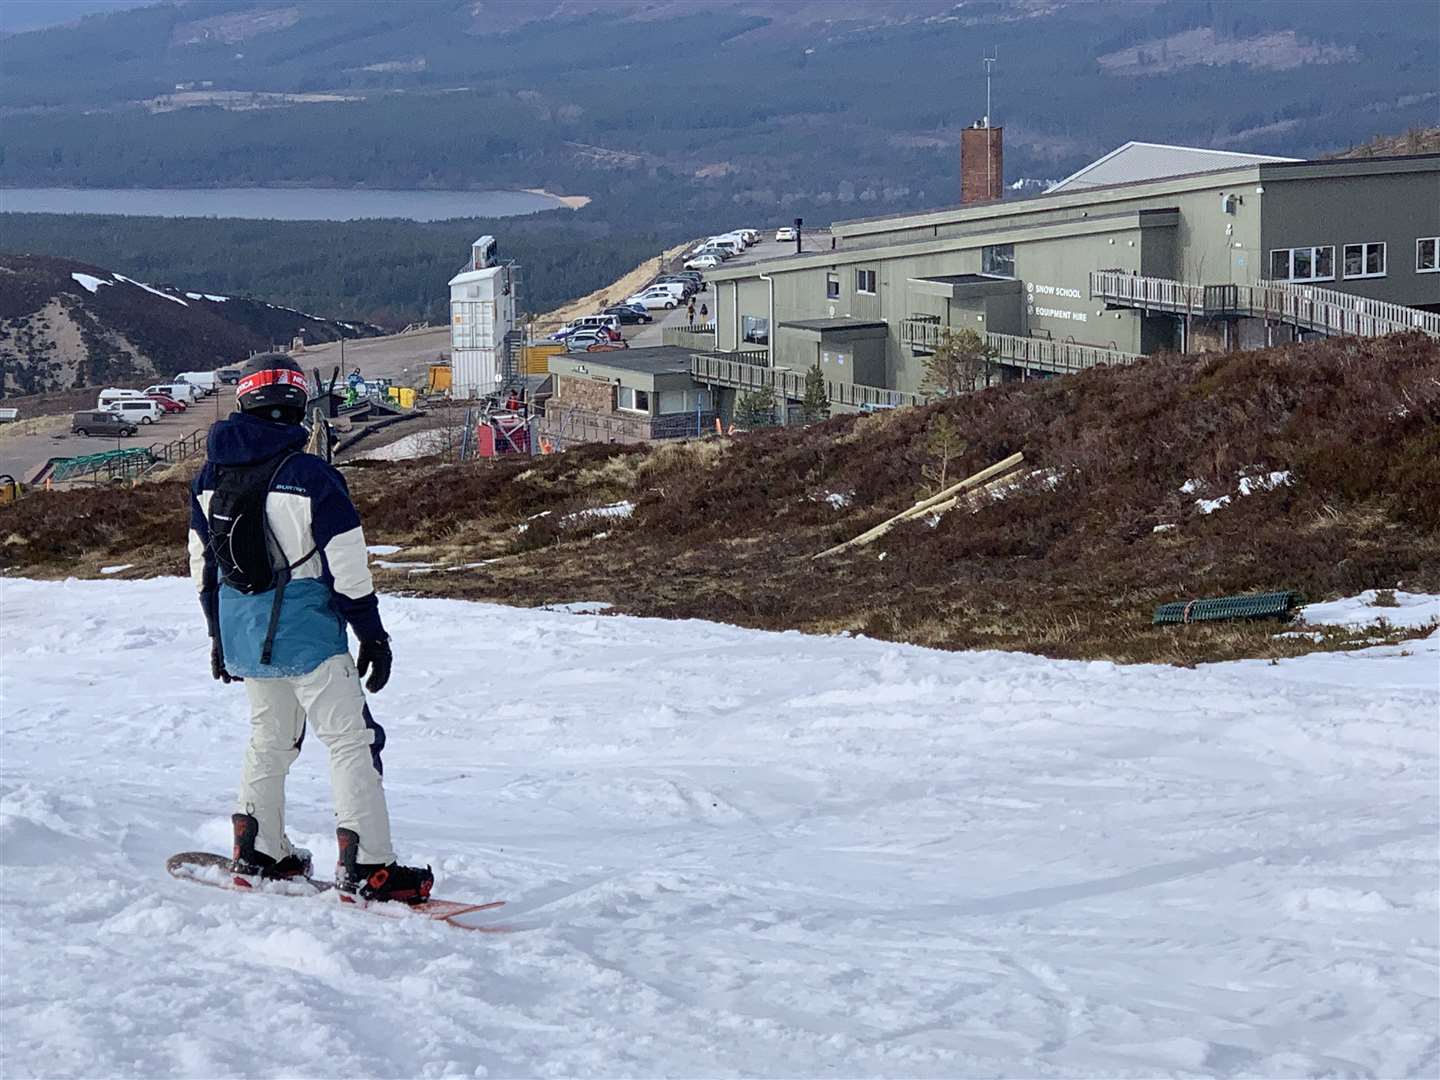 Heading for home. A snowboarder on his last run of the season at Cairngorm Mountain on Sunday.